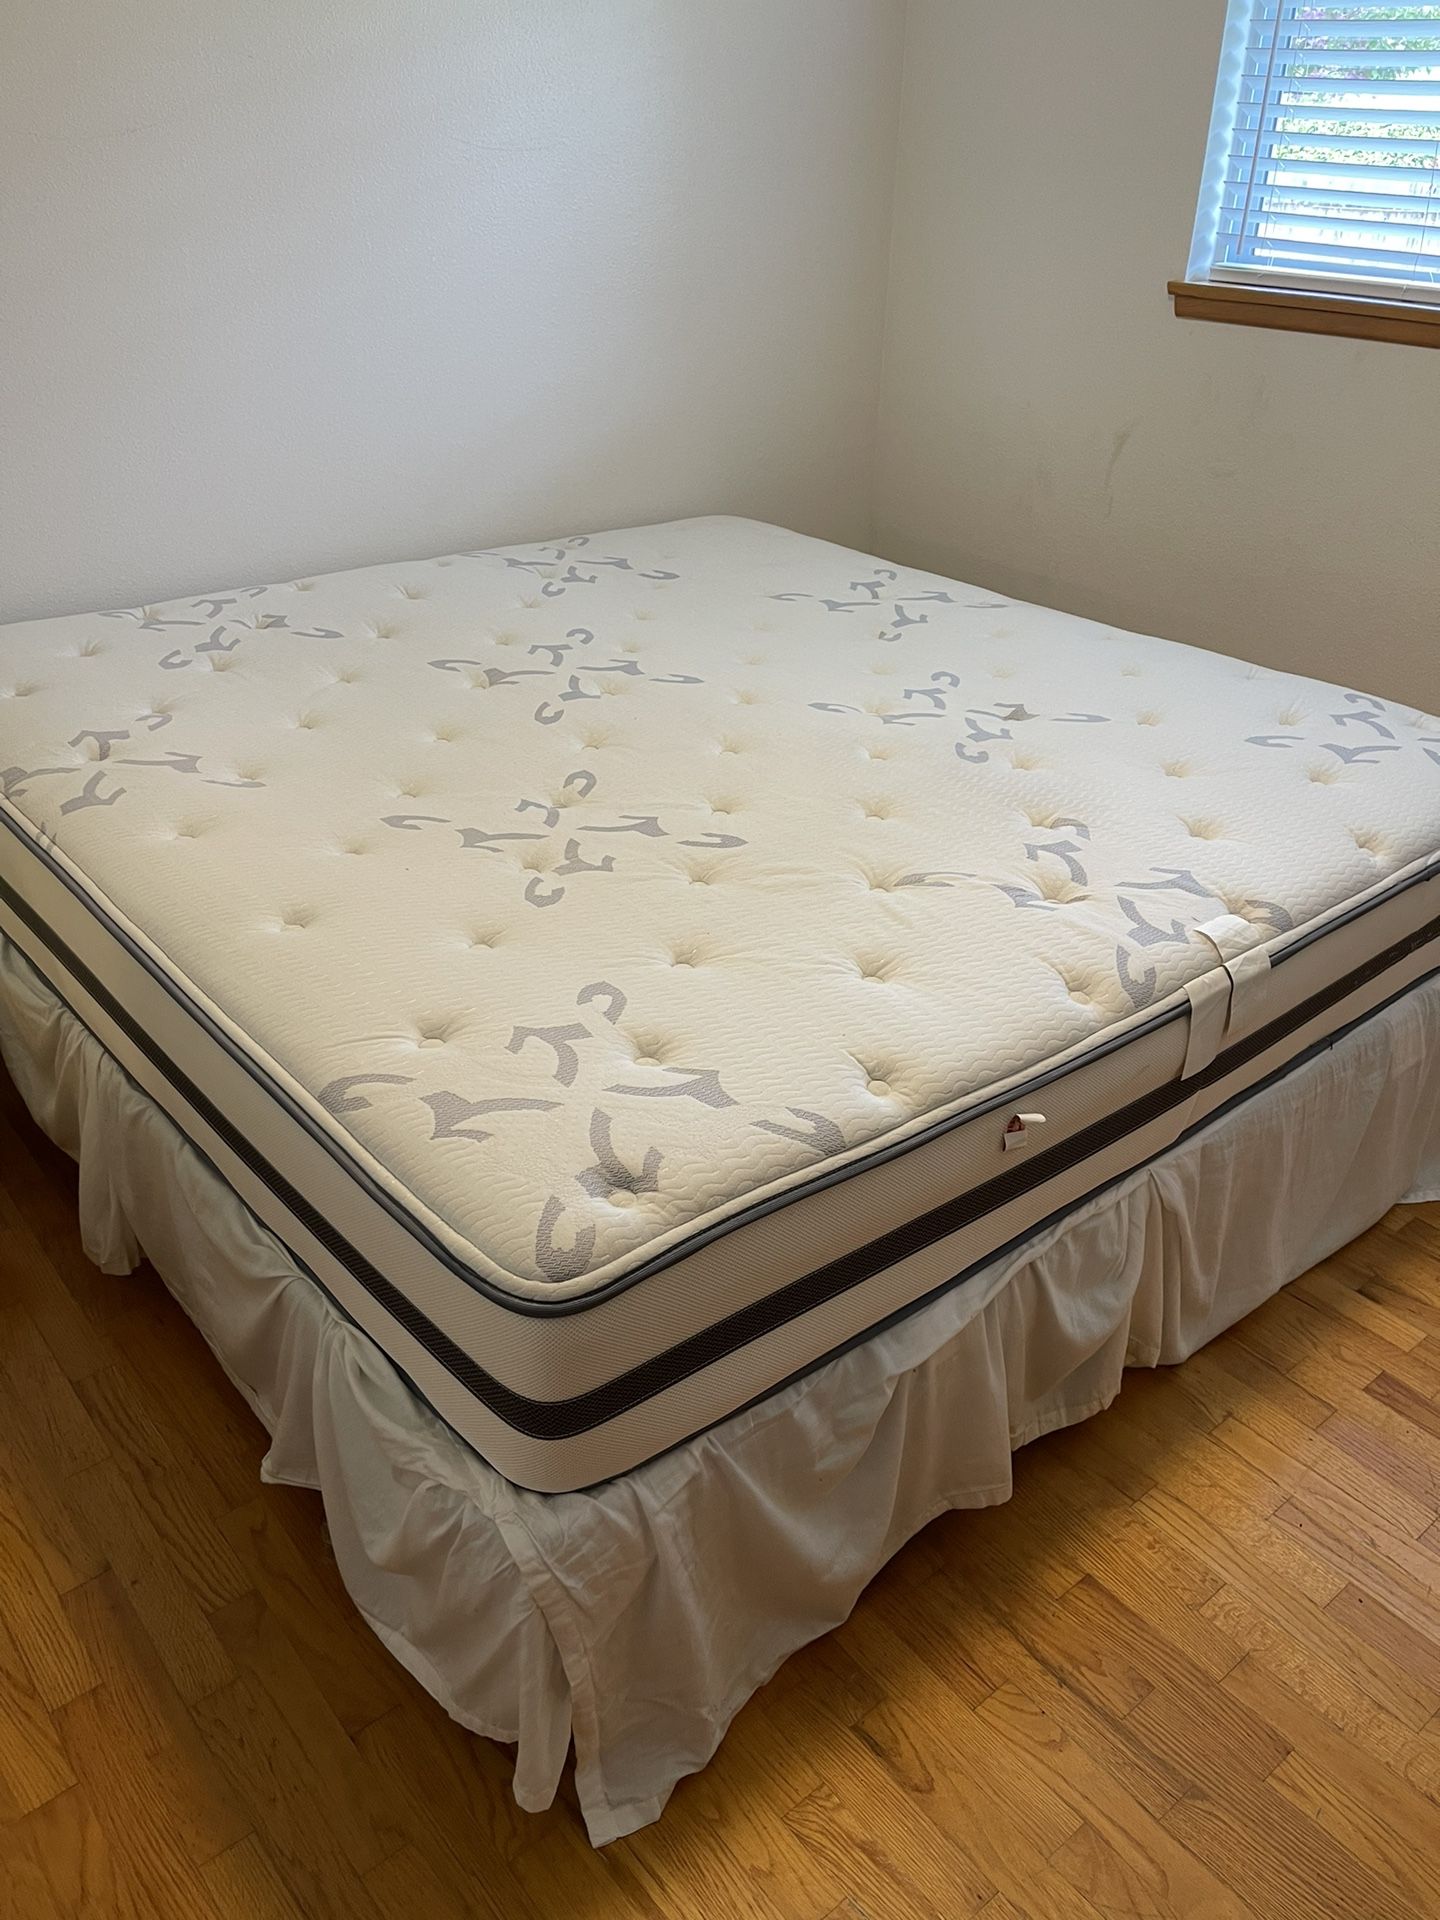 King Size Beauty Rest Mattress With 2 Box Springs And Metal Frame